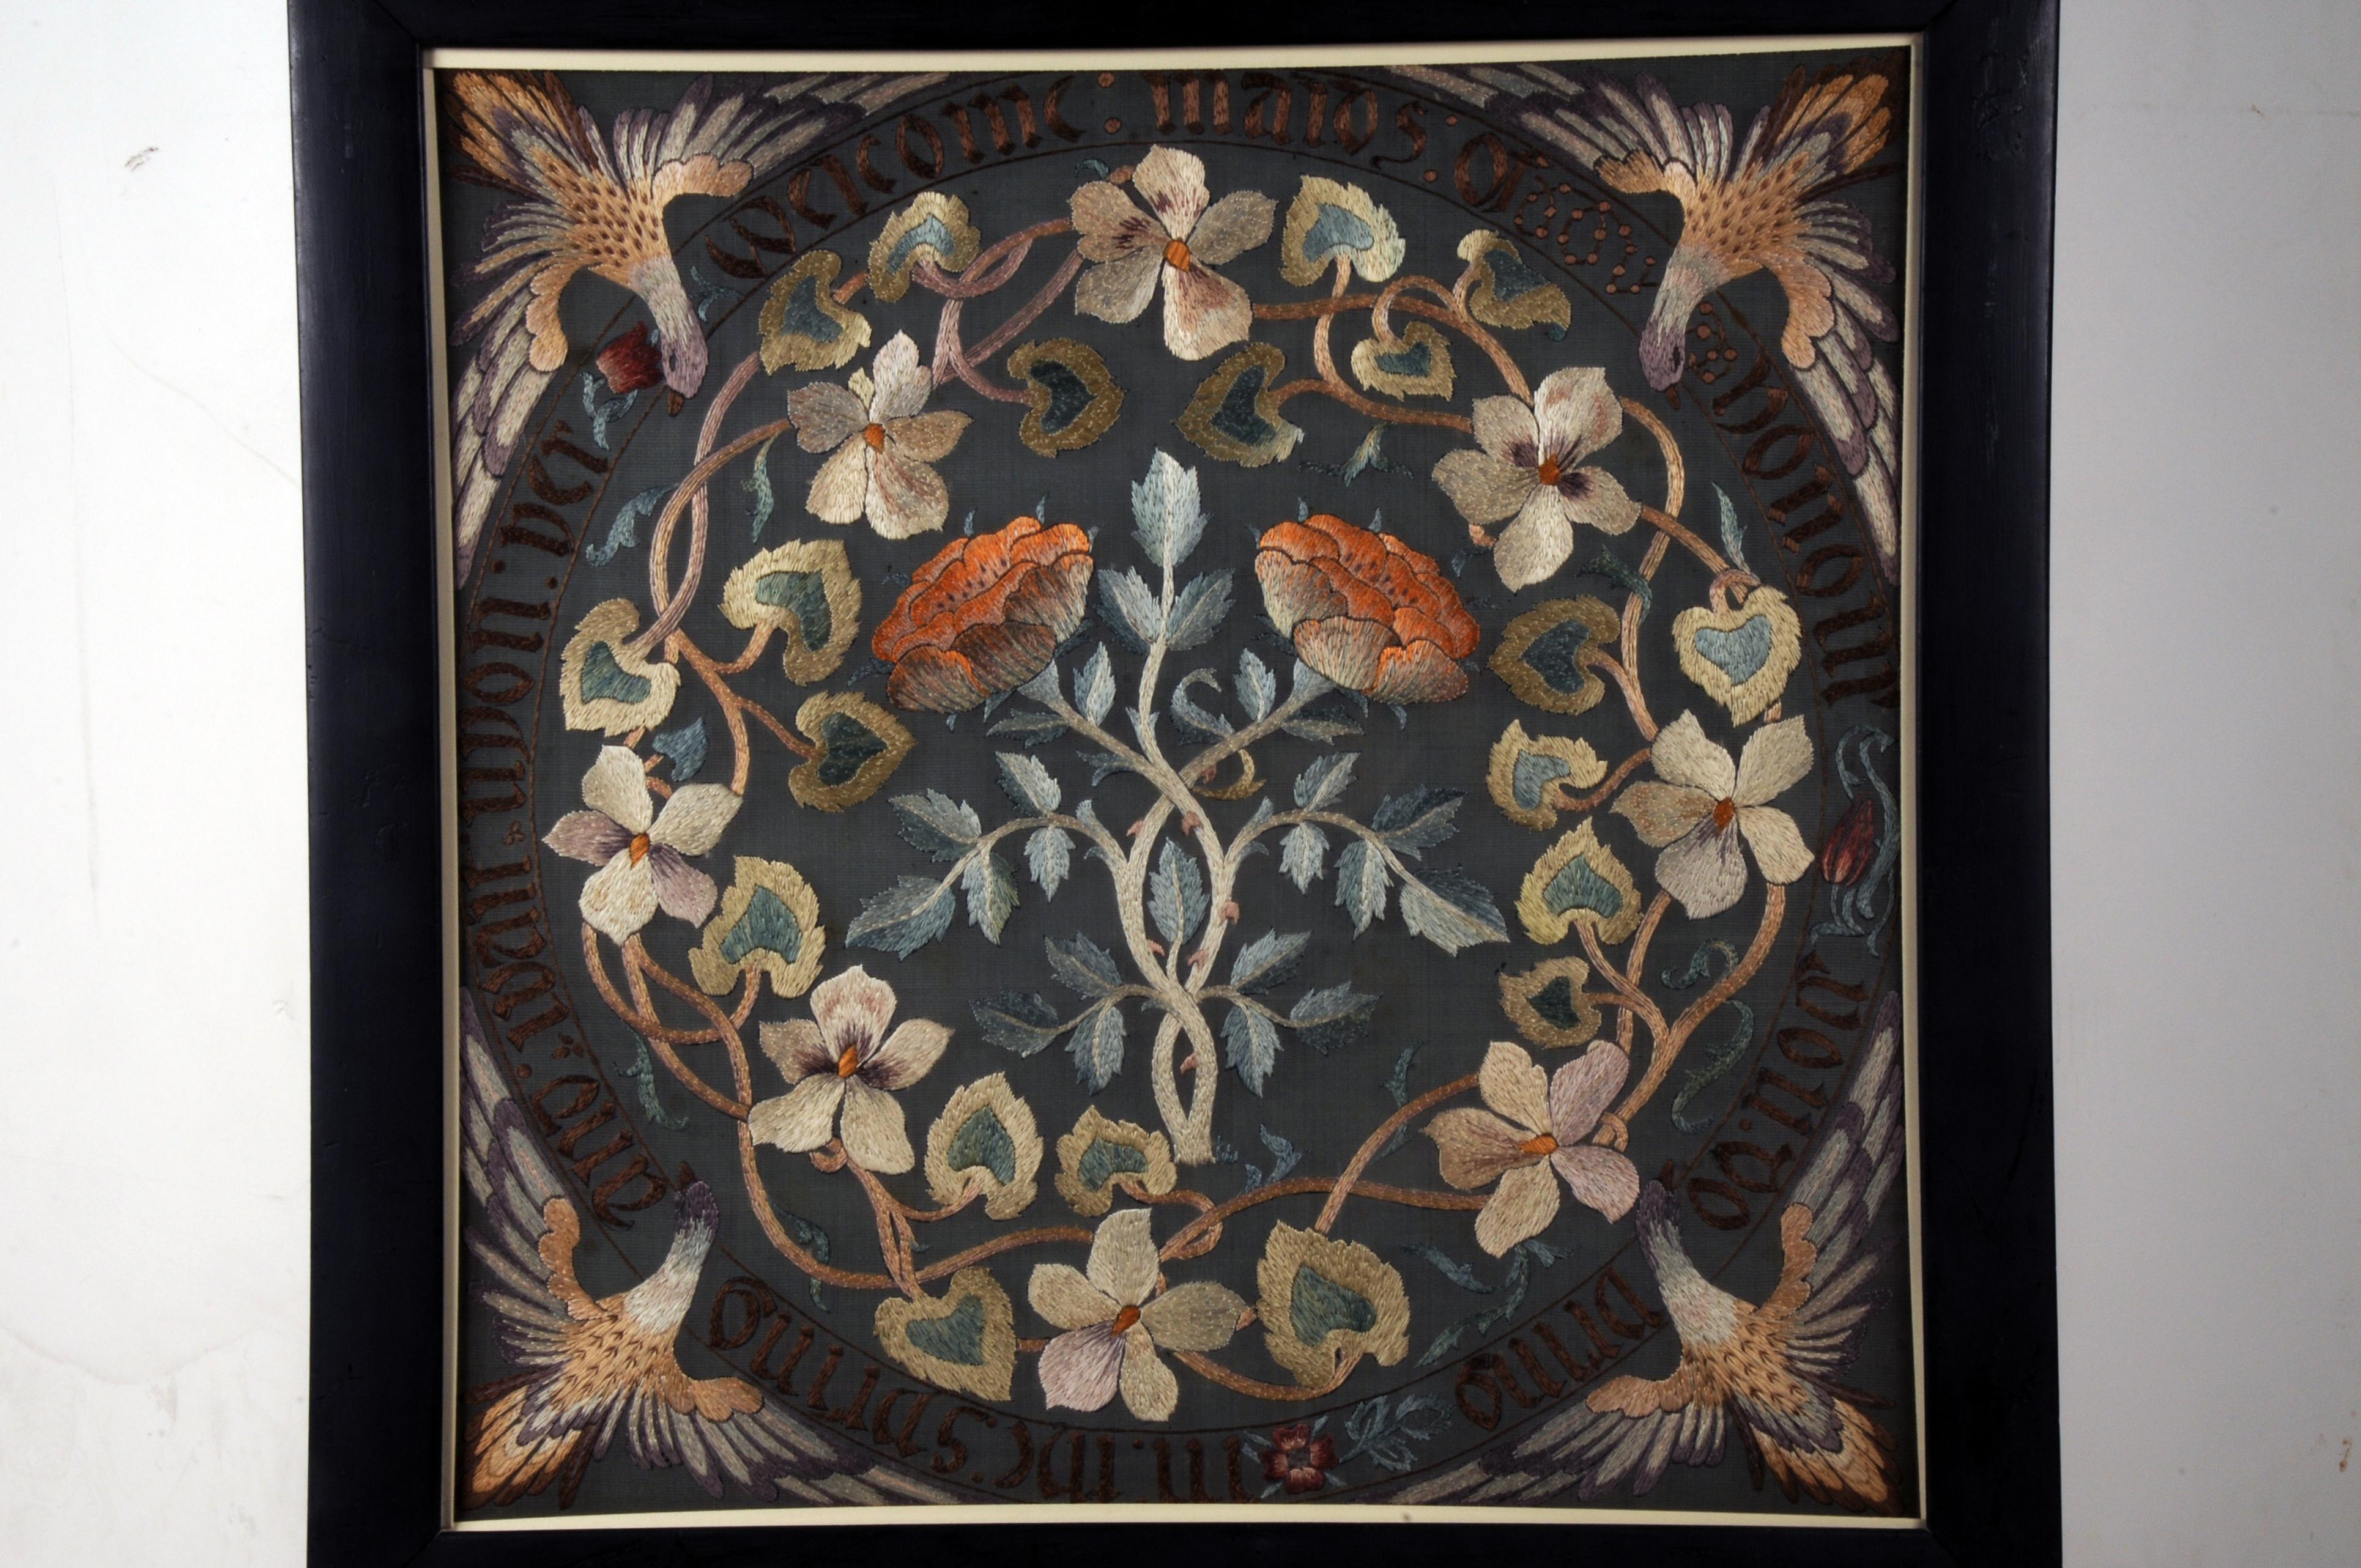 Maids of Honour embroidery (c.1900)